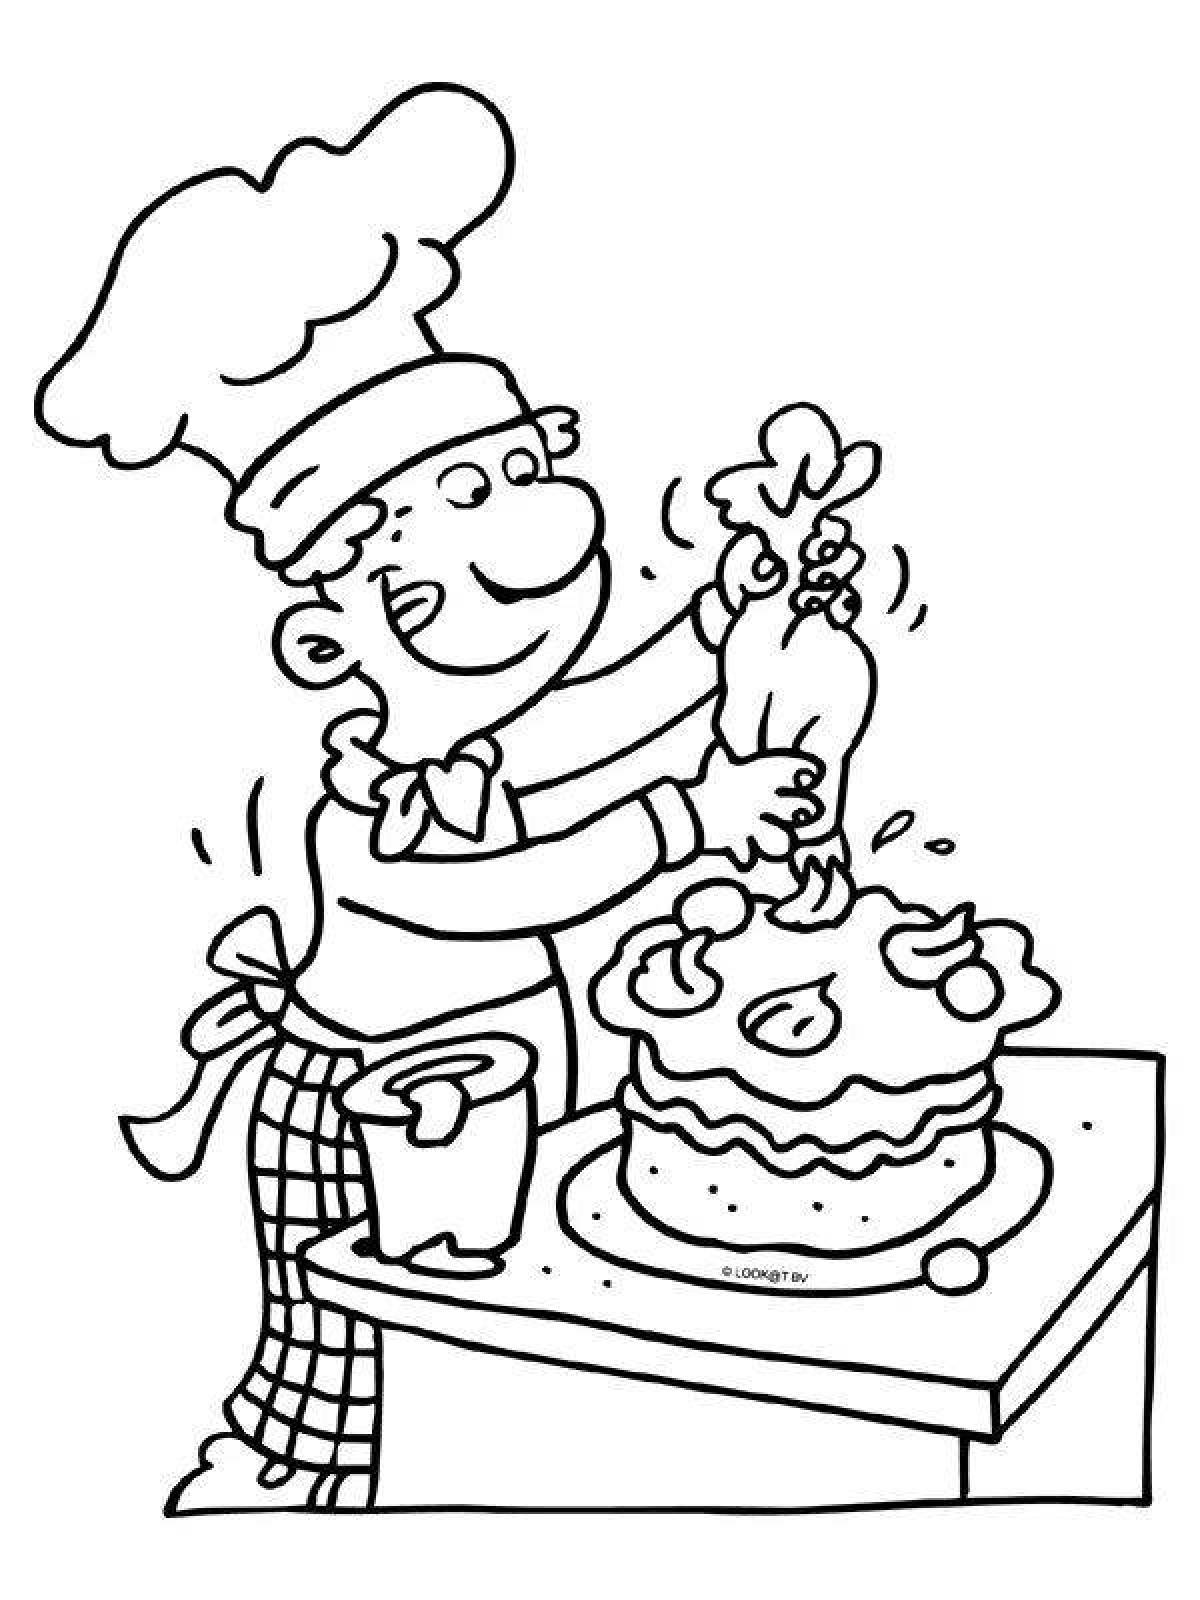 Delightful pastry chef coloring page